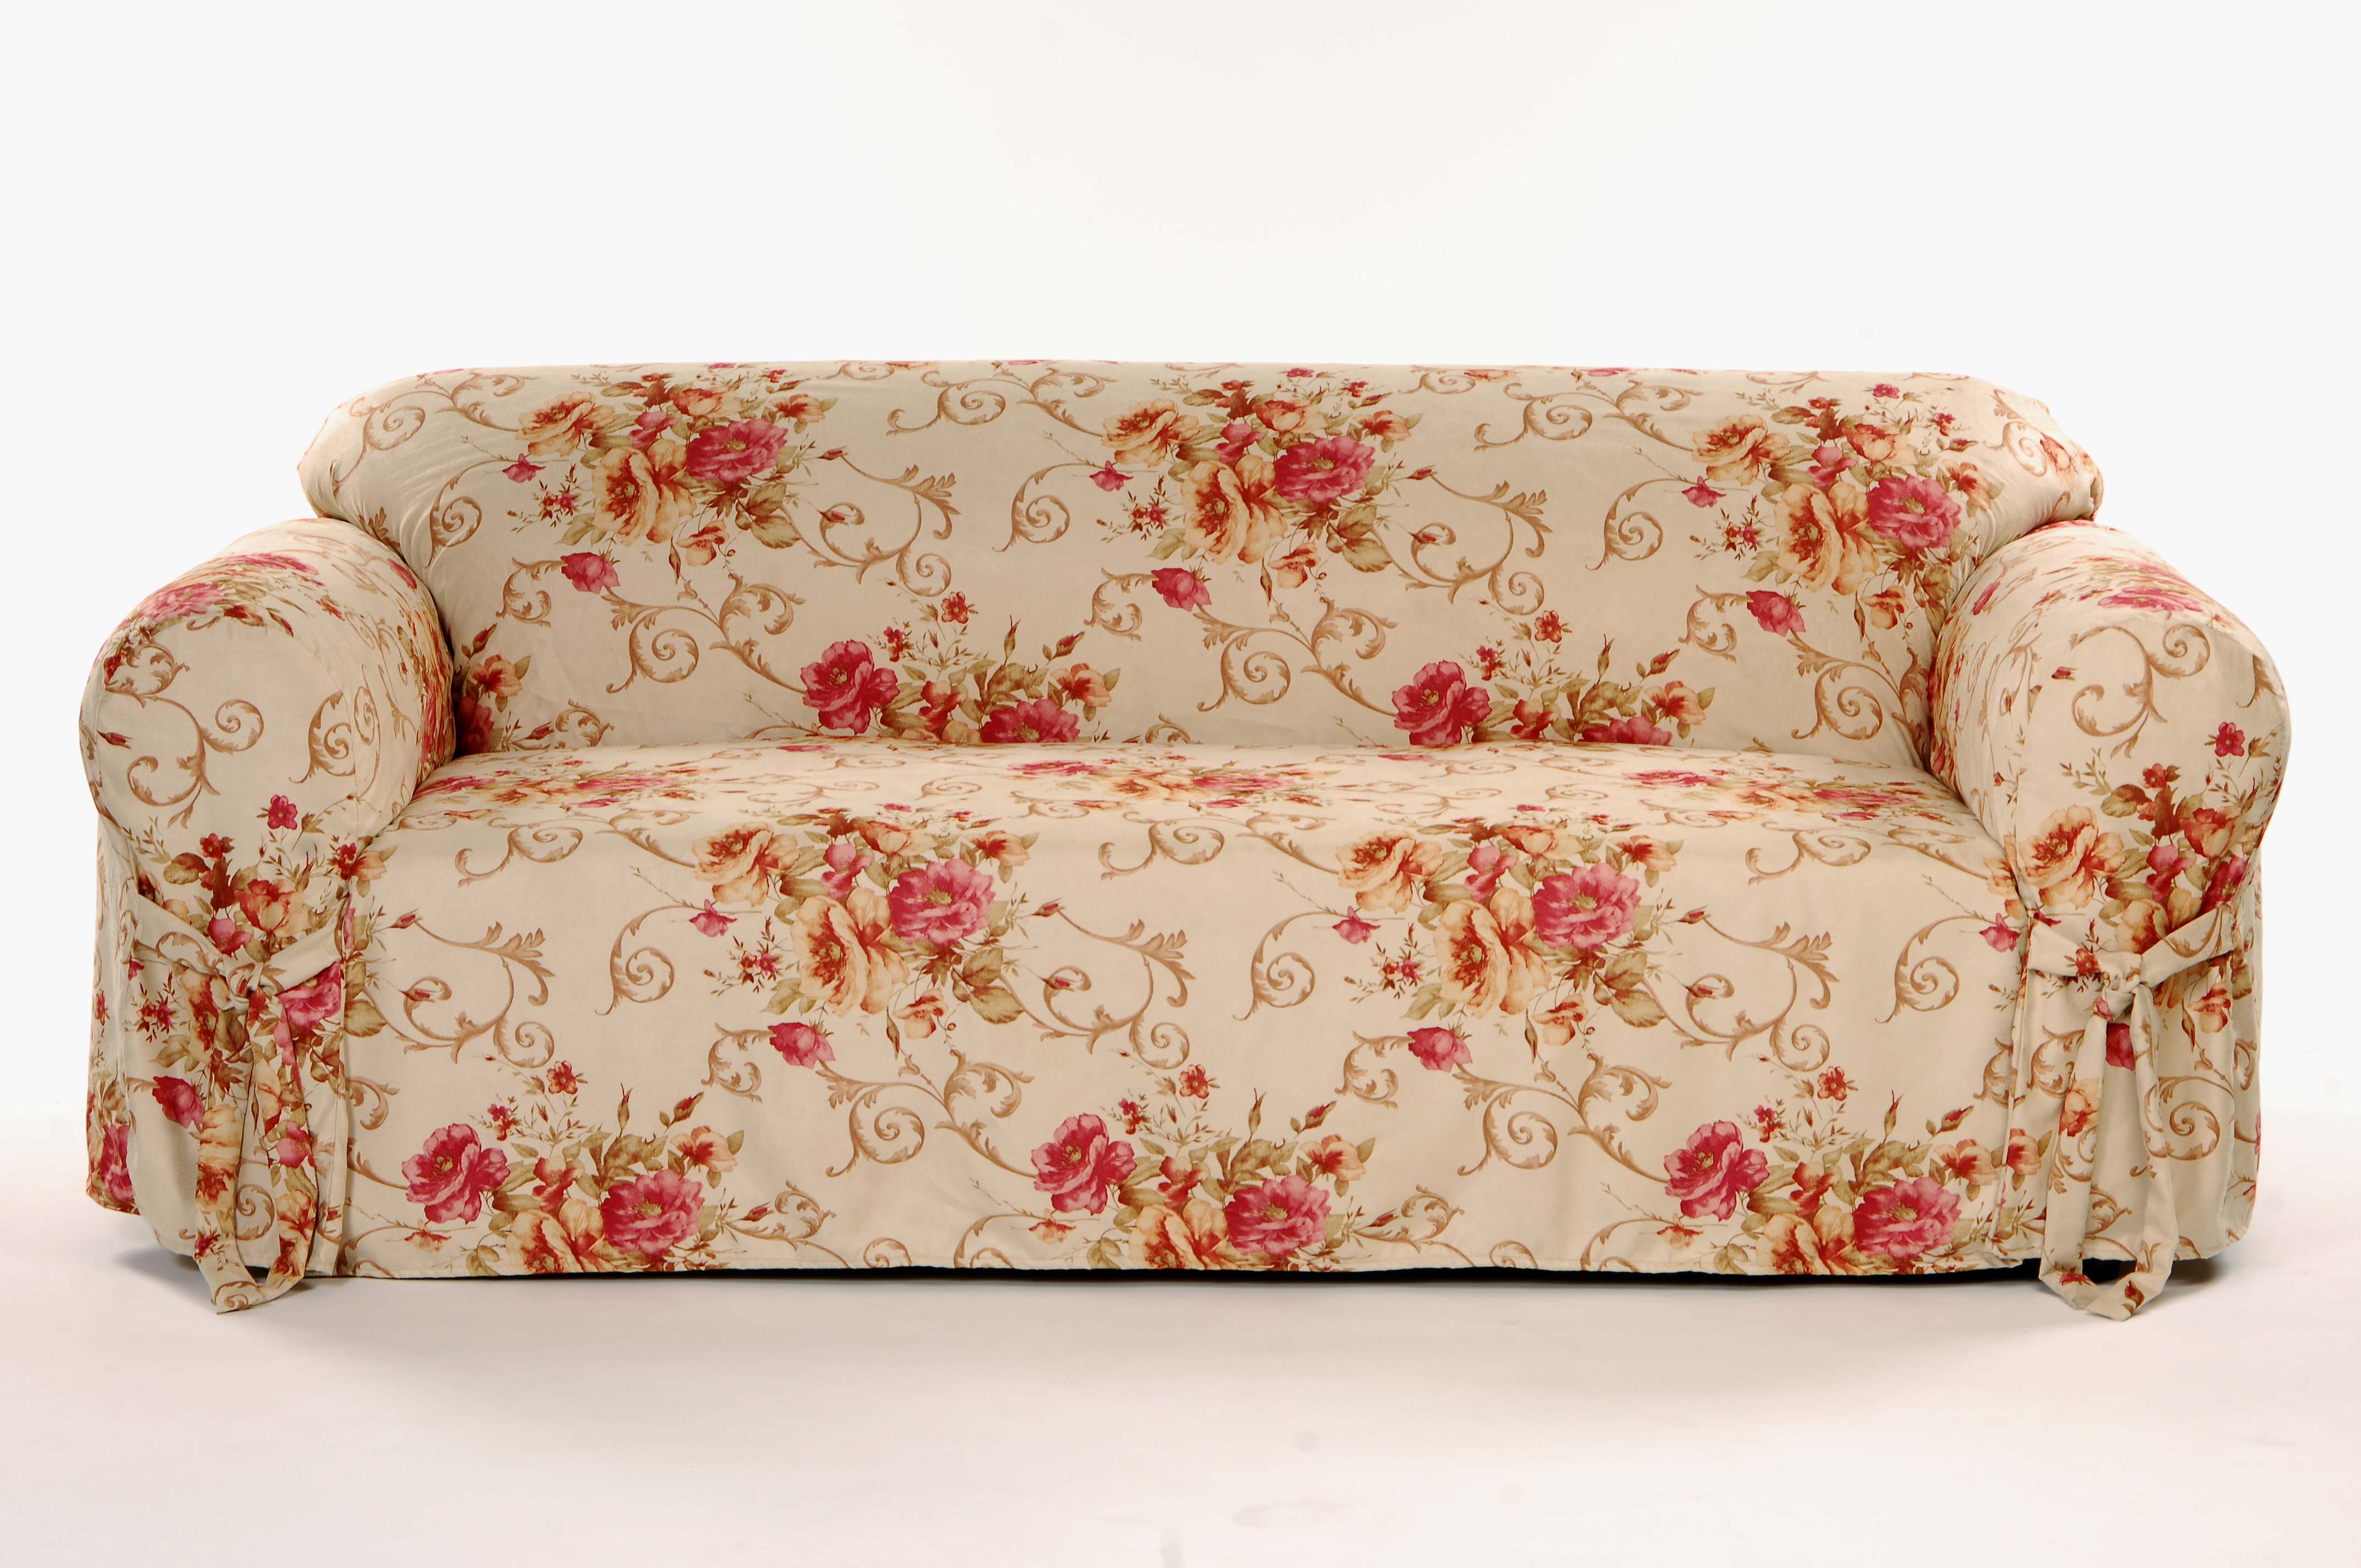 Bouquet Floral Faux Suede Sofa Slipcover Free Shipping